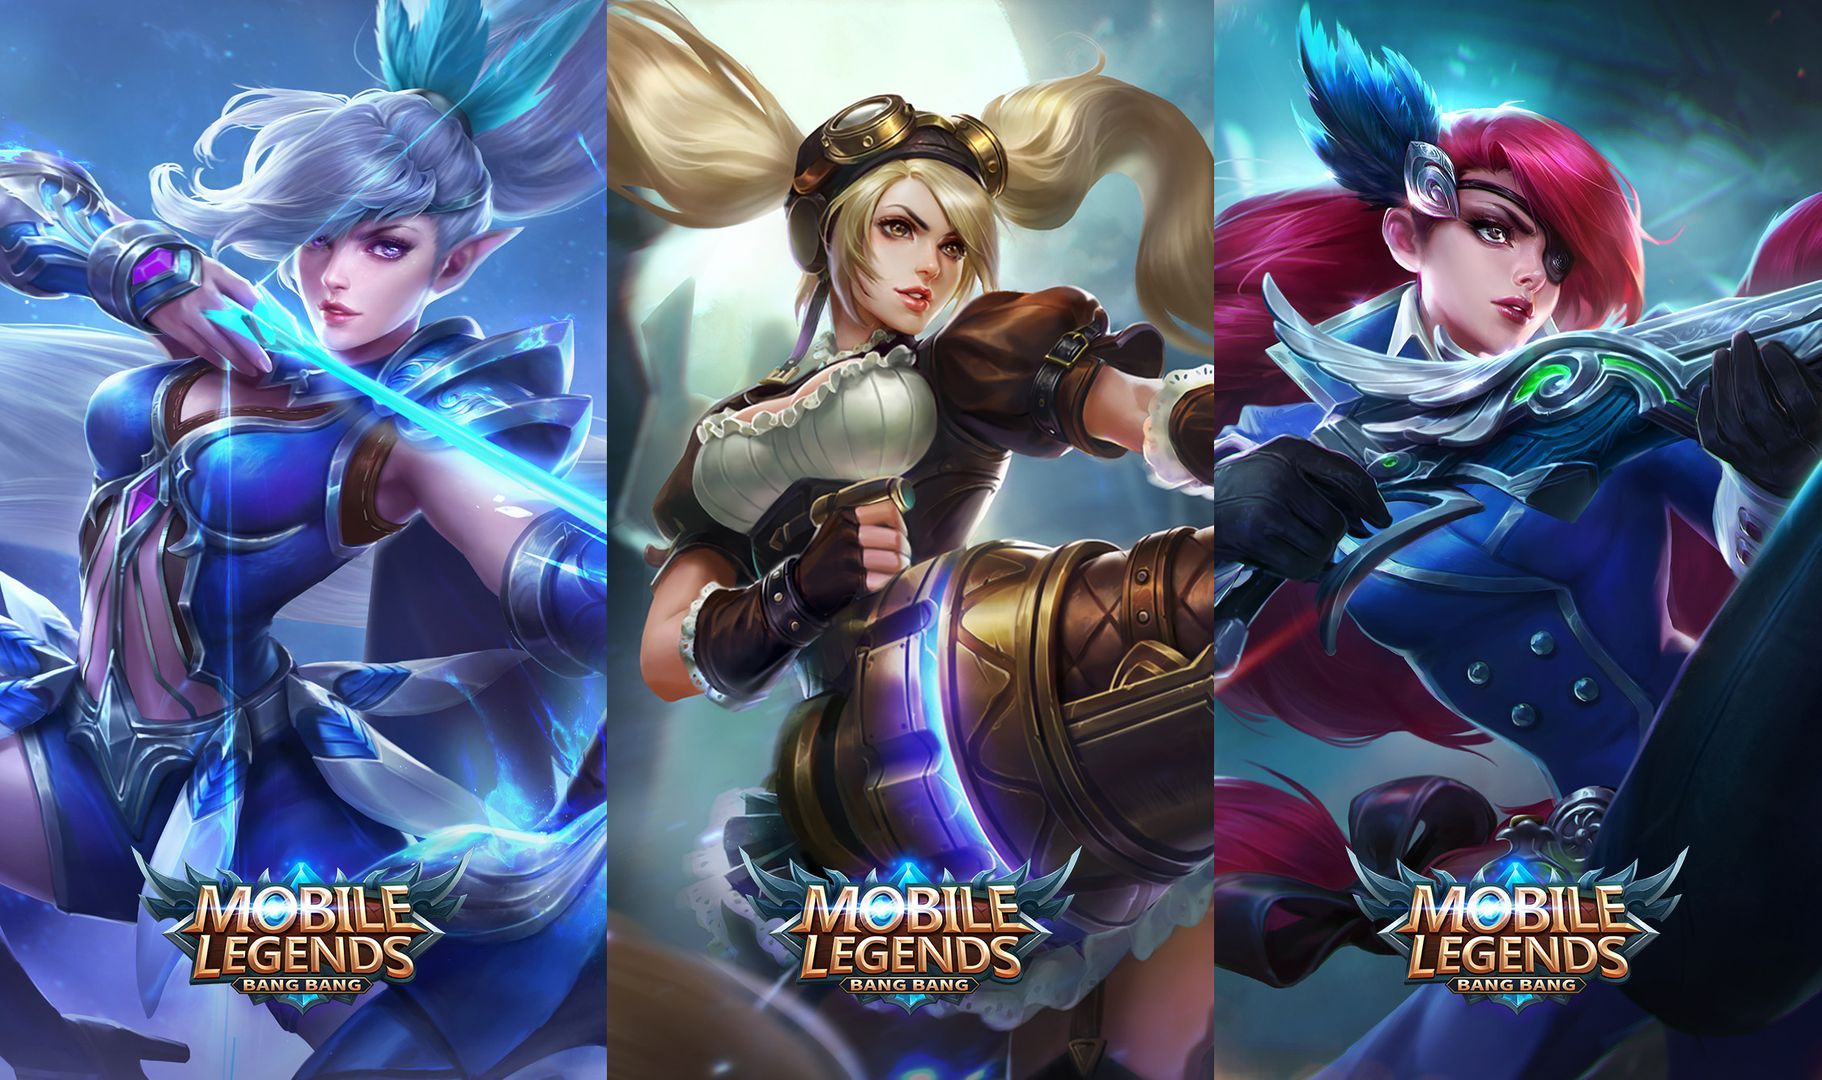 what is mobile legends essay brainly